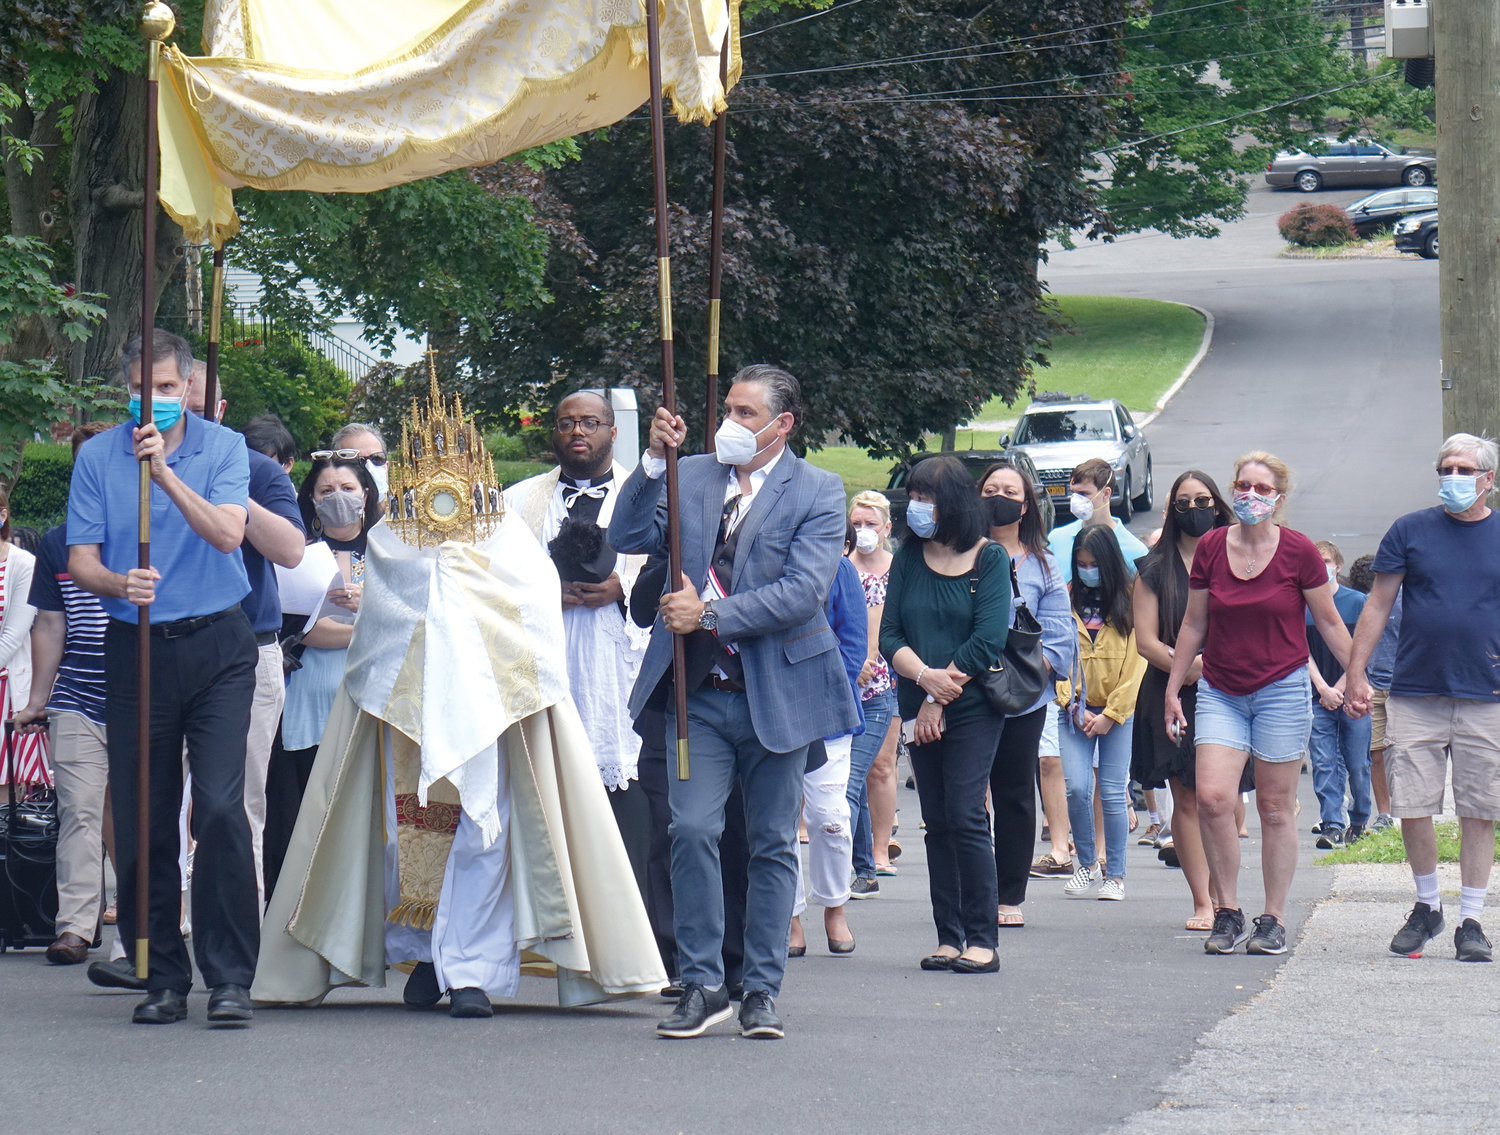 Parishioners of Annunciation-Our Lady of Fatima in Crestwood celebrated the reopening of their church and the Solemnity of the Most Holy Body and Blood of Christ with a Eucharistic procession June 14.